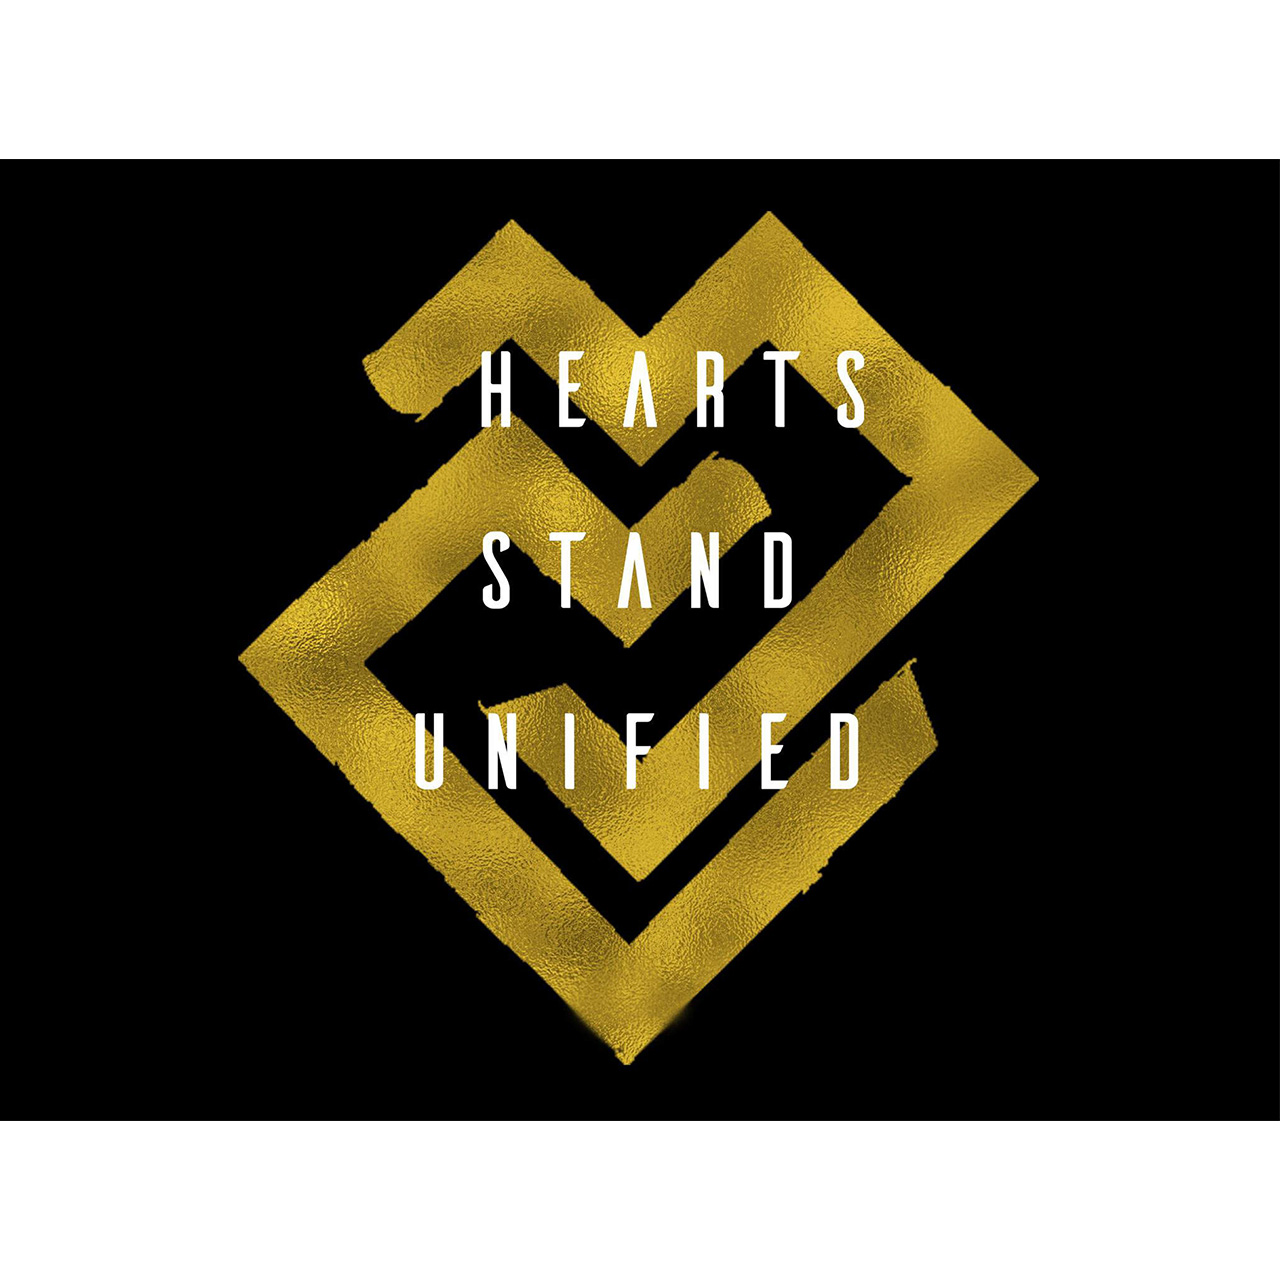 Hearts stand unified (CD)